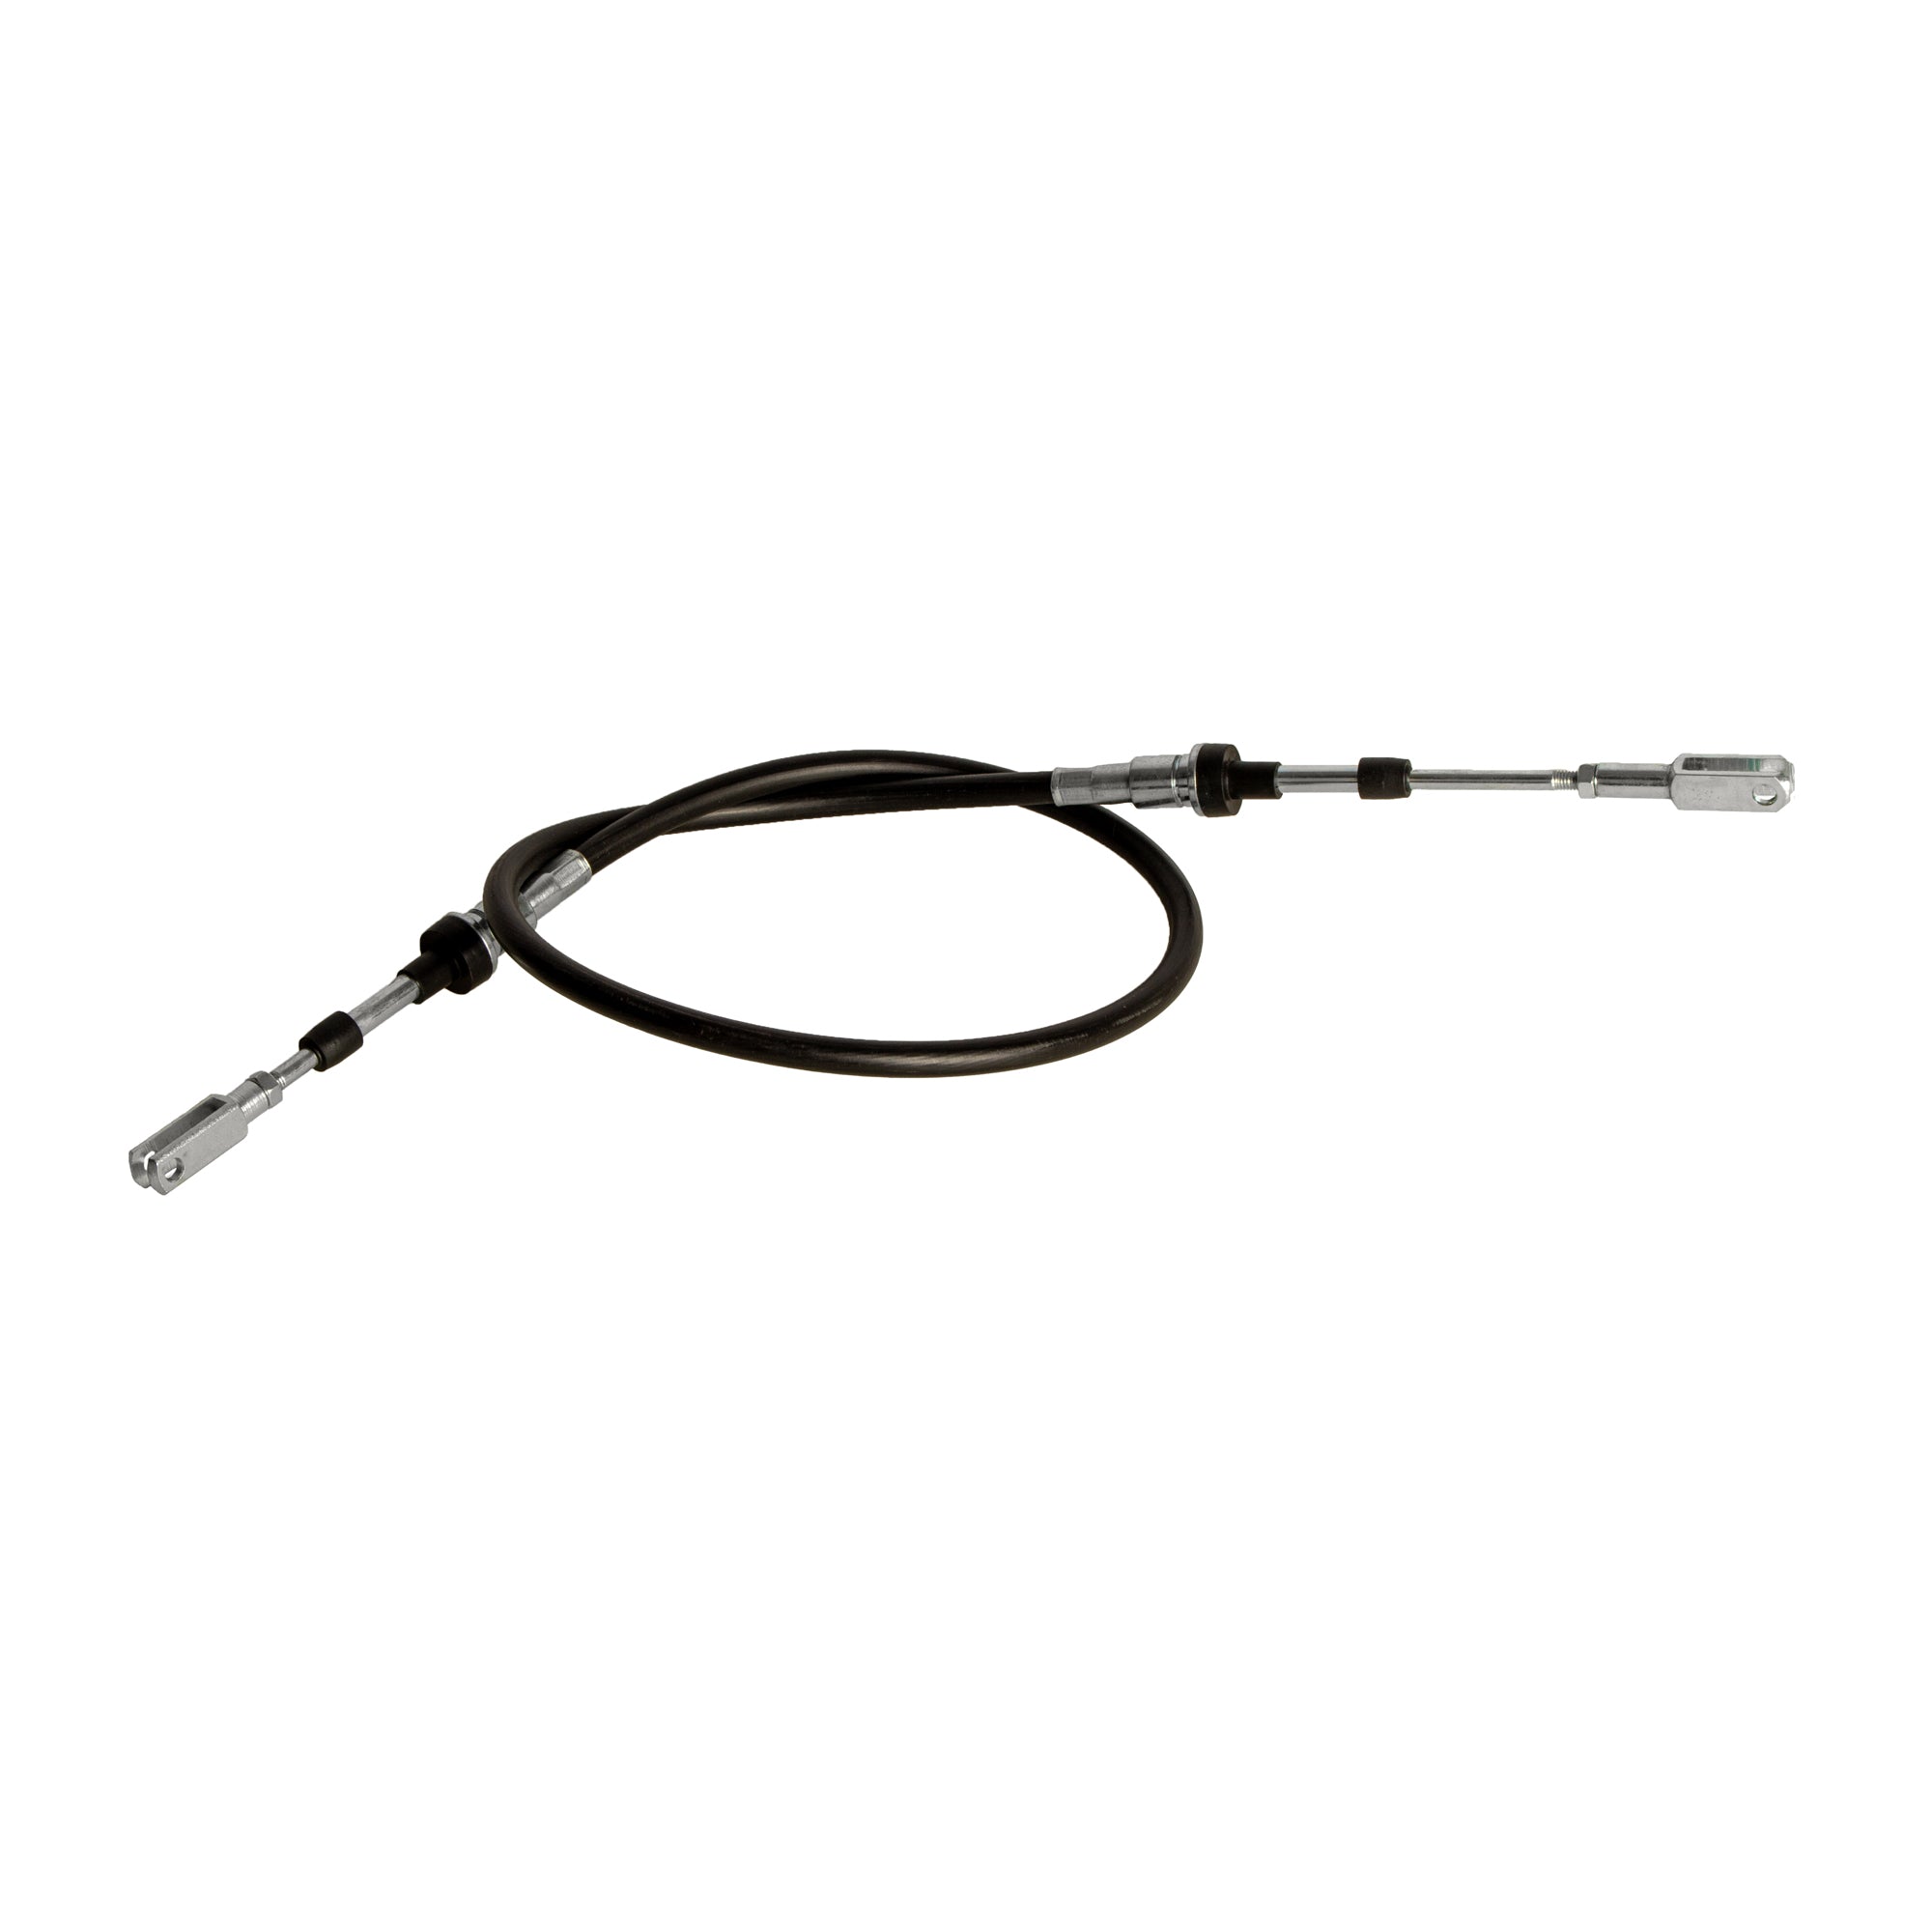 Flat Floor Cab Push Pull Cable Replacement for JOHN DEERE 6020 6310 AL112765